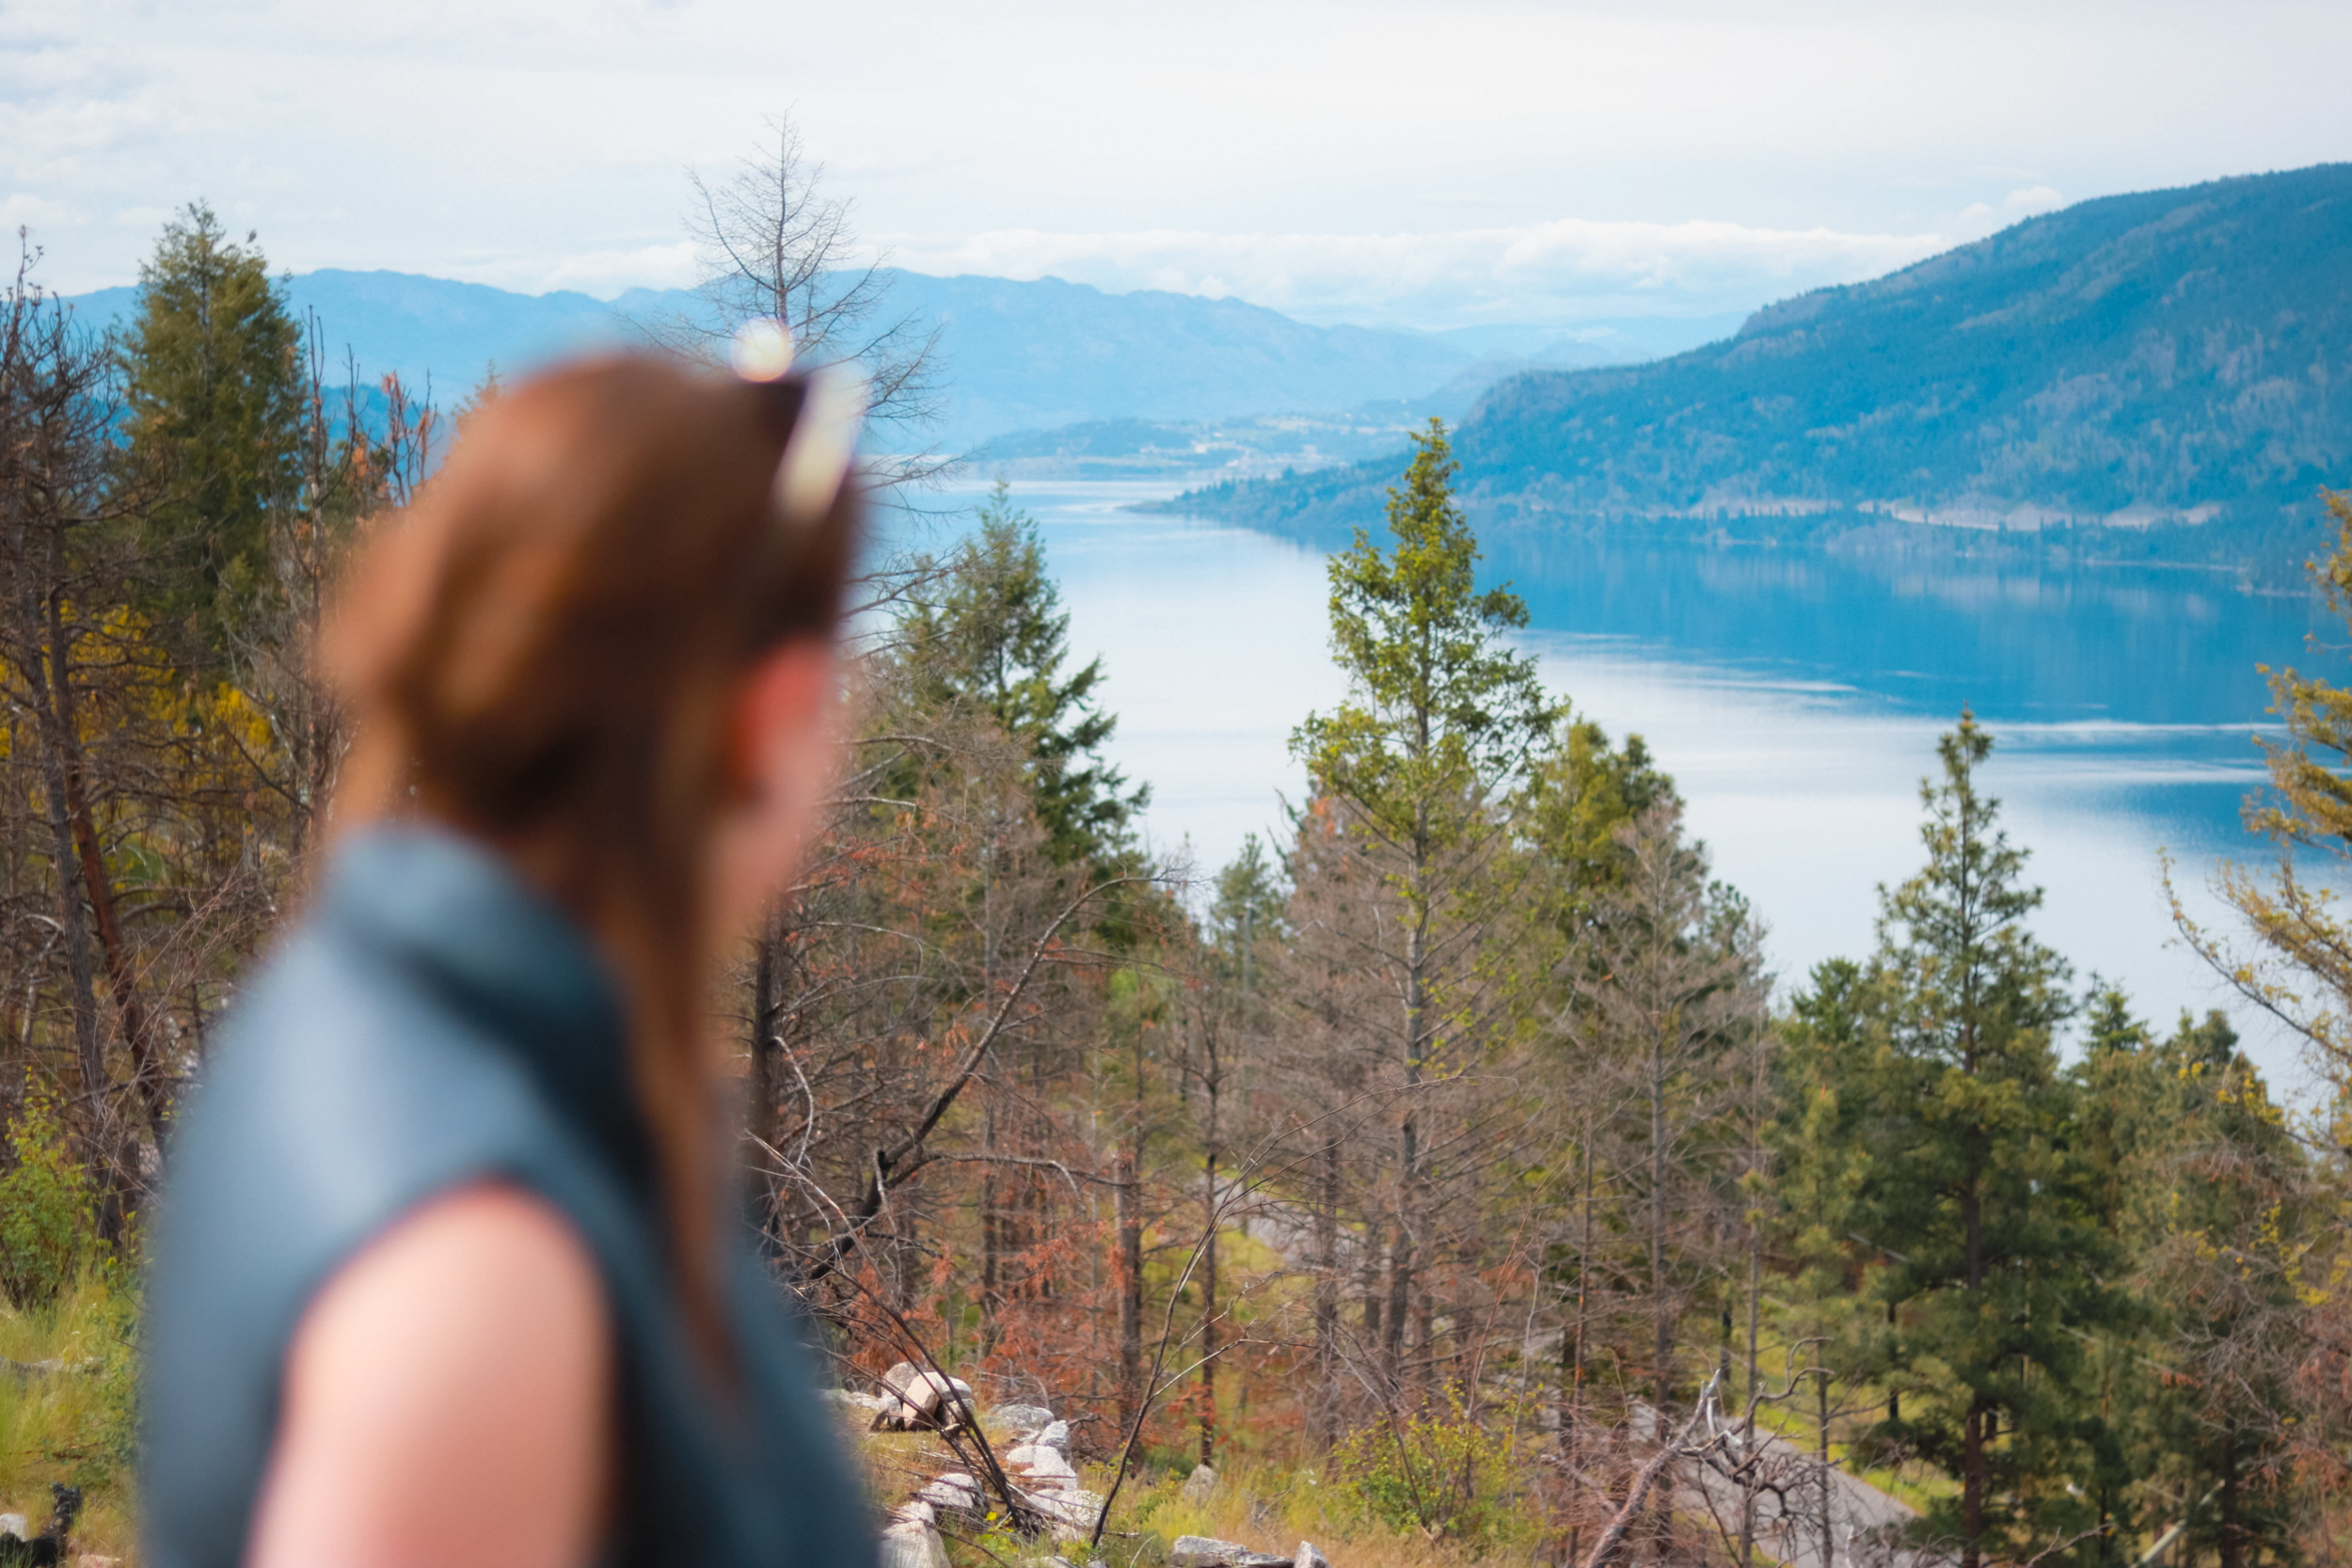 Park Guide: Jack Seaton Park in Lake Country, BC